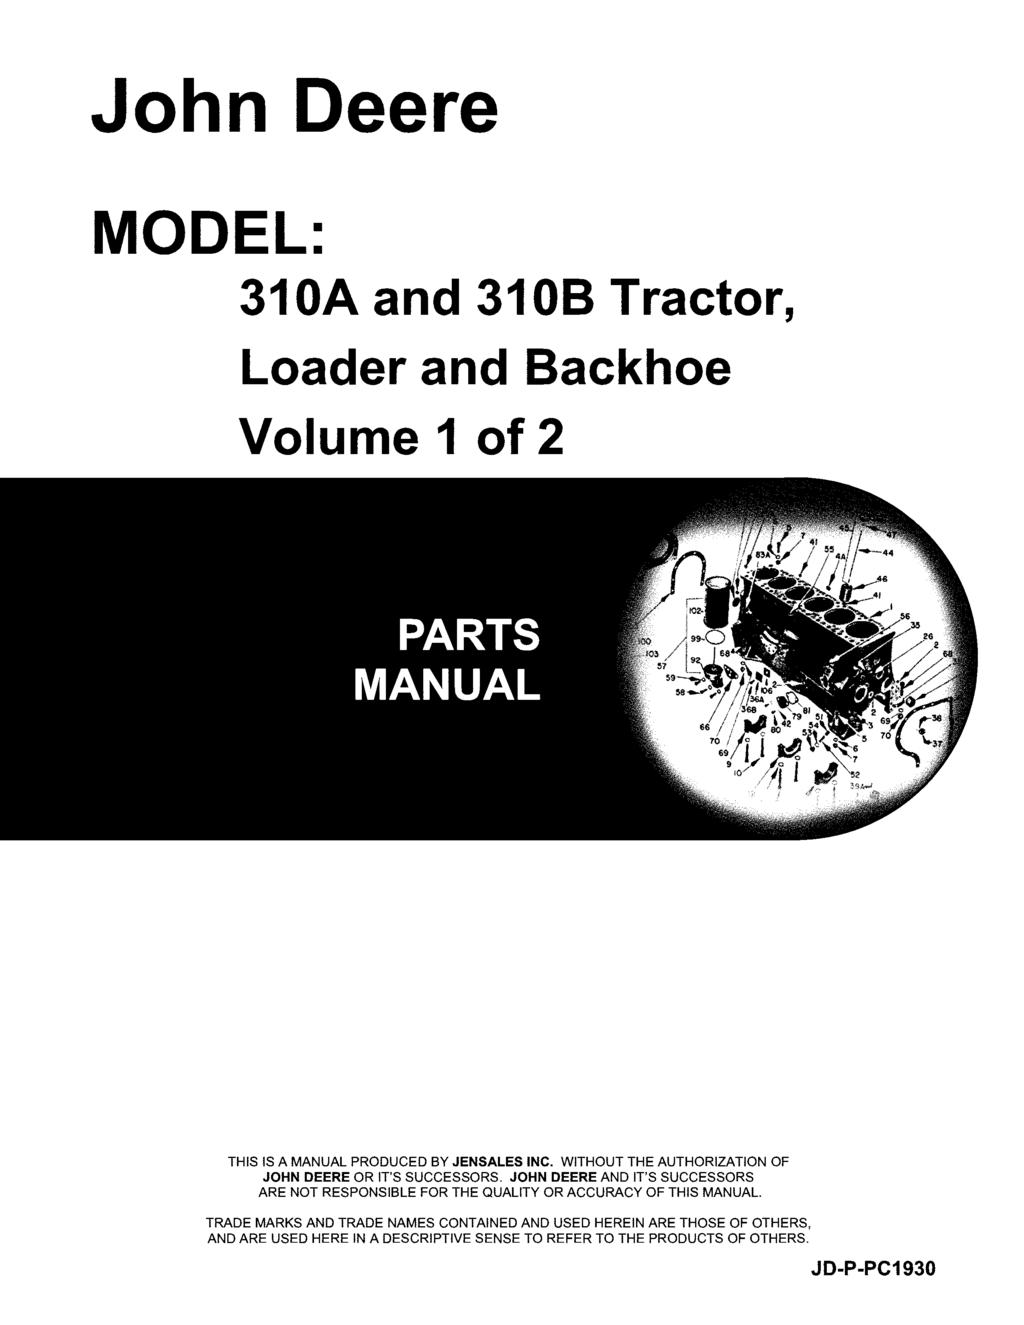 John Deere MODEL: 310A and 3108 Tractor, Loader and Backhoe Volume 1 of 2 THIS IS A MANUAL PRODUCED BY JENSALES INC. WITHOUT THE AUTHORIZATION OF JOHN DEERE OR IT'S SUCCESSORS.